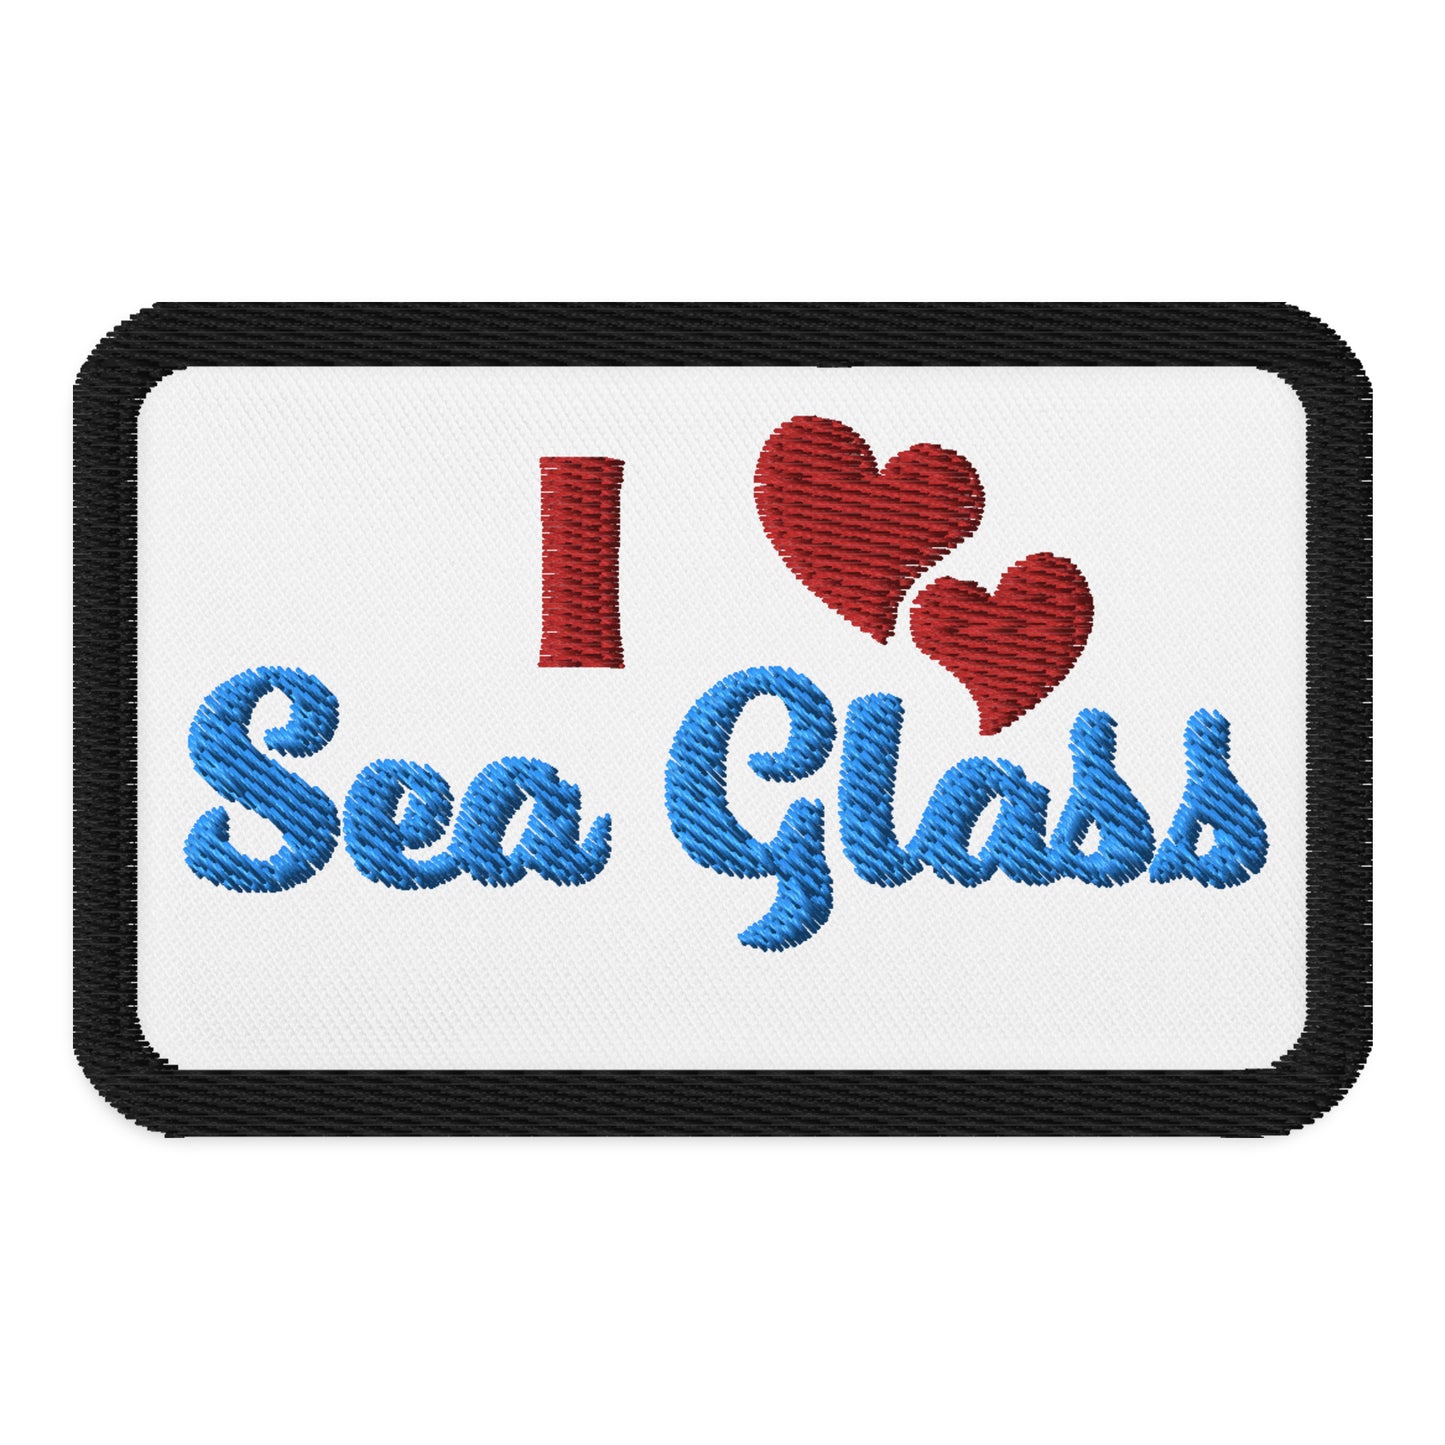 Embroidered Square Patch - I Love Sea Glass